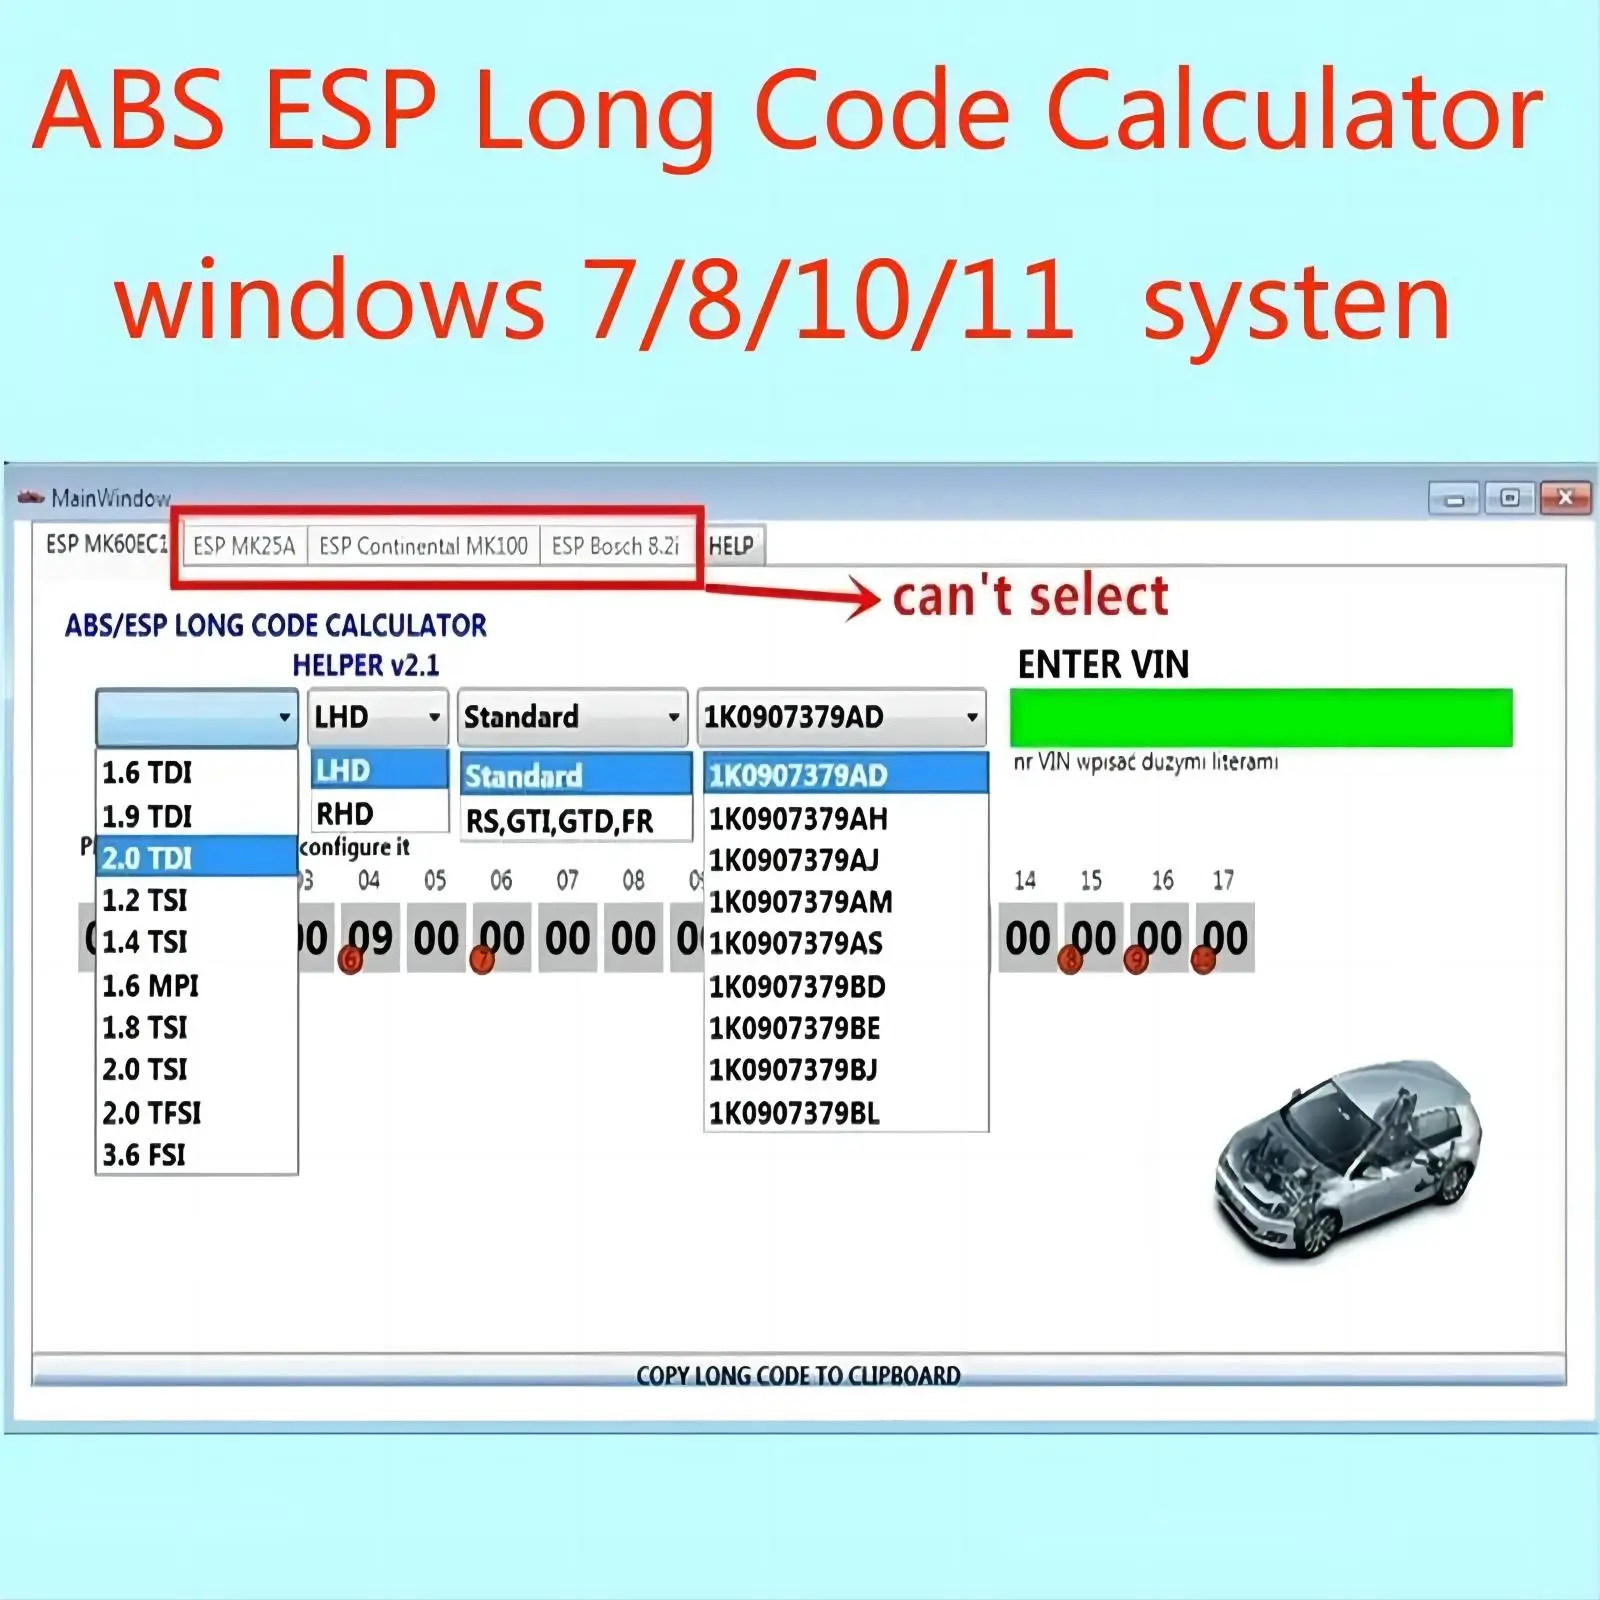 

ABS ESP Long Code Calculator for Bosch ESP units Changes to Adaptations and Codes VAG VCDS VIN number Suports over 20 Cars